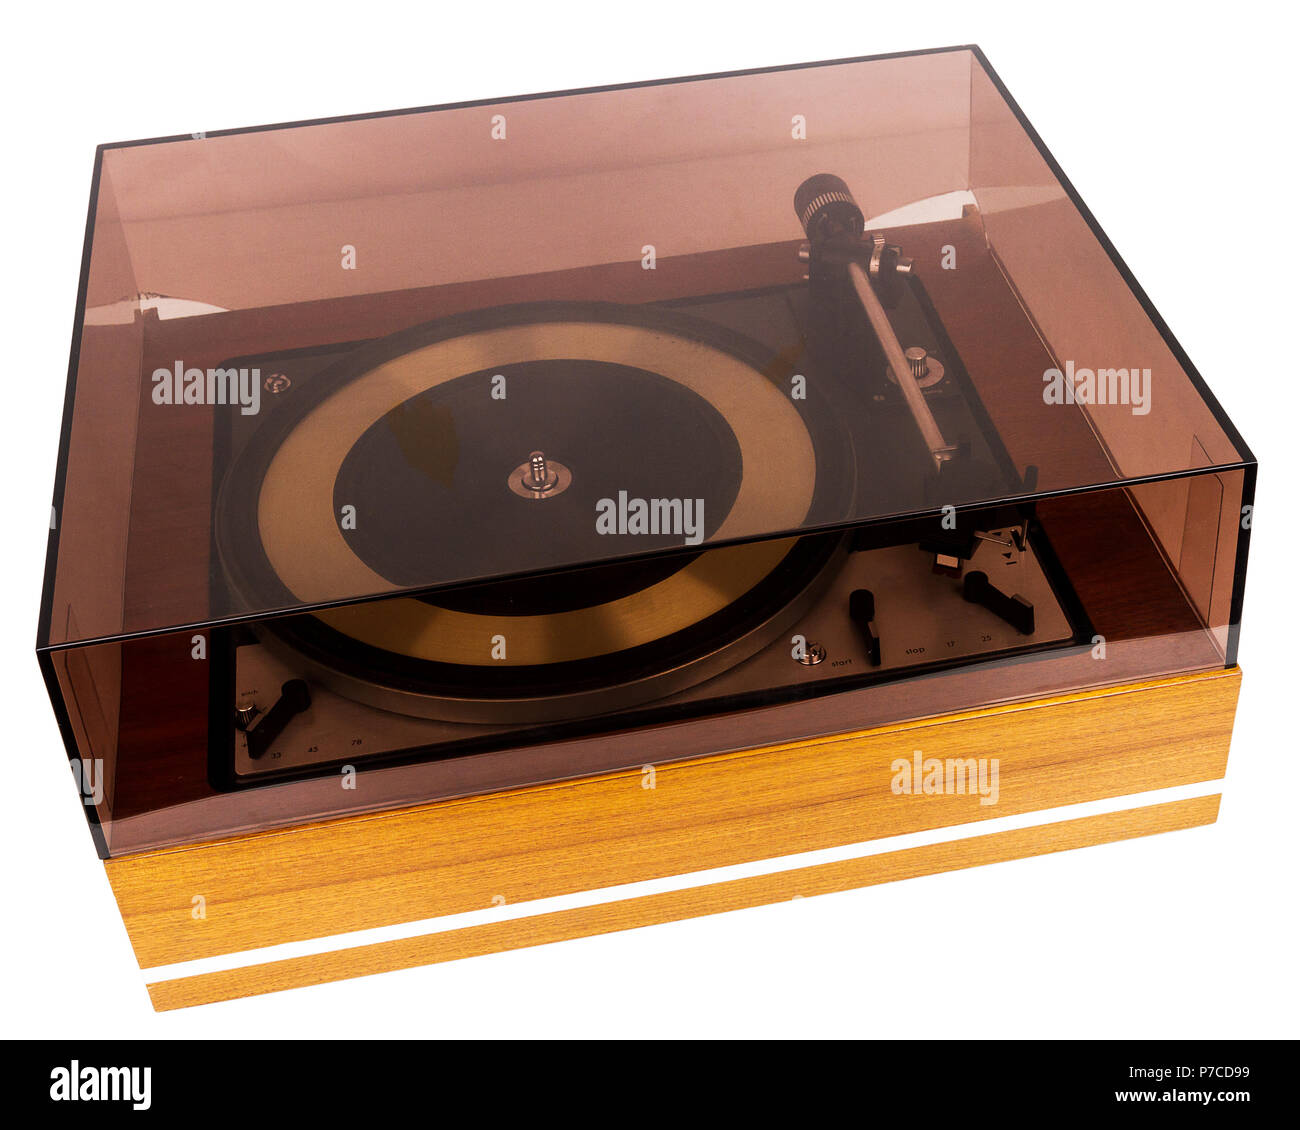 Vintage stereo turntable vinyl record player with a dust cover isolated on white background Stock Photo